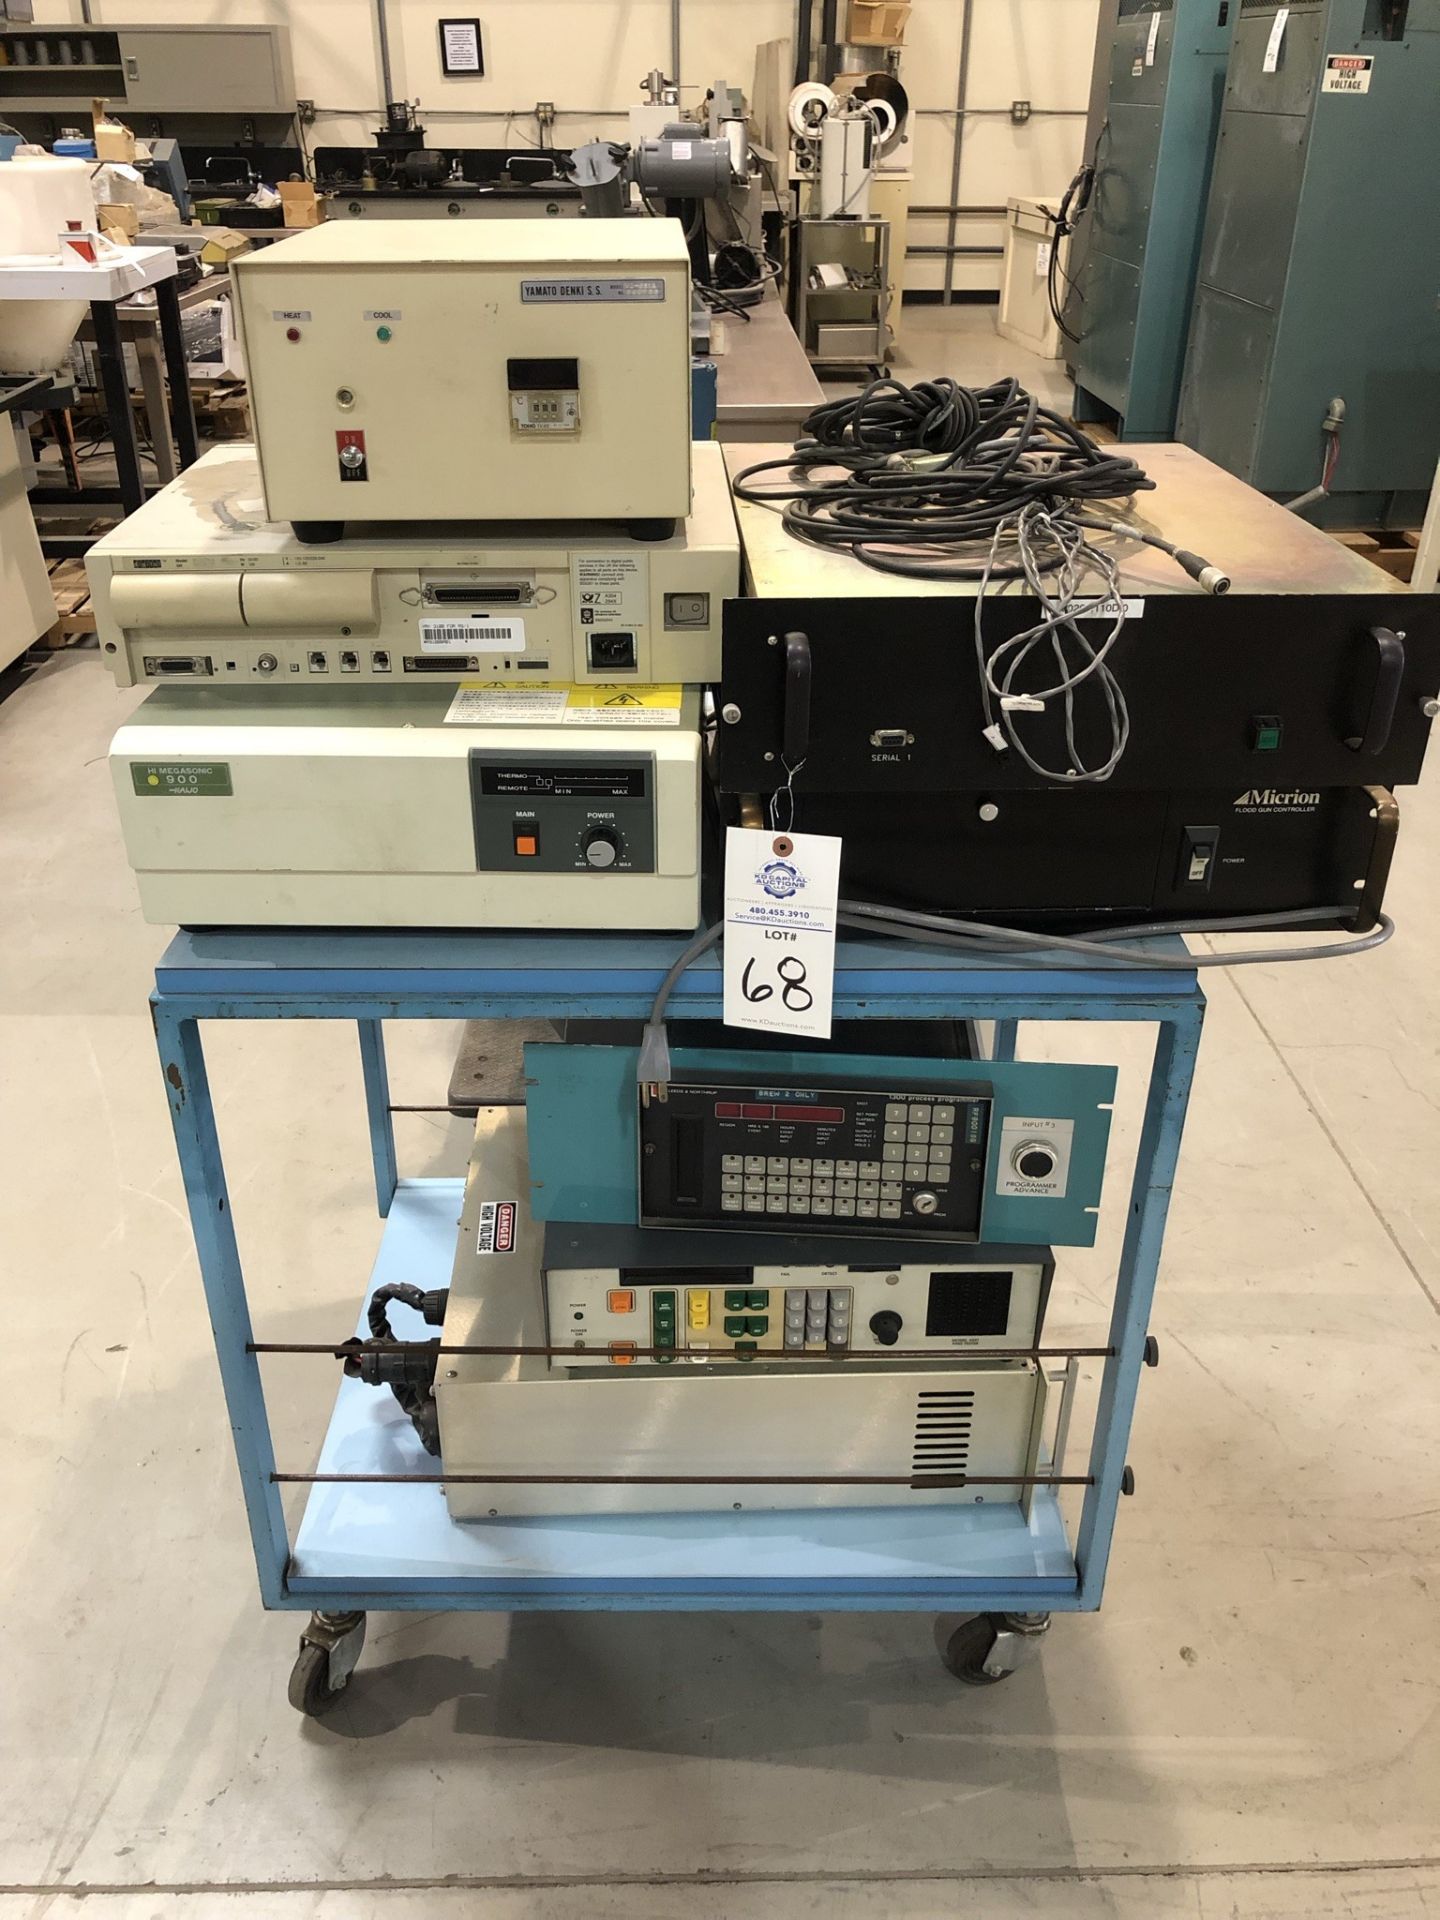 Leeds and Northrup 1300 process programmer, Dunnigan Corp Model 4501A Accelerometer, Commonwealth